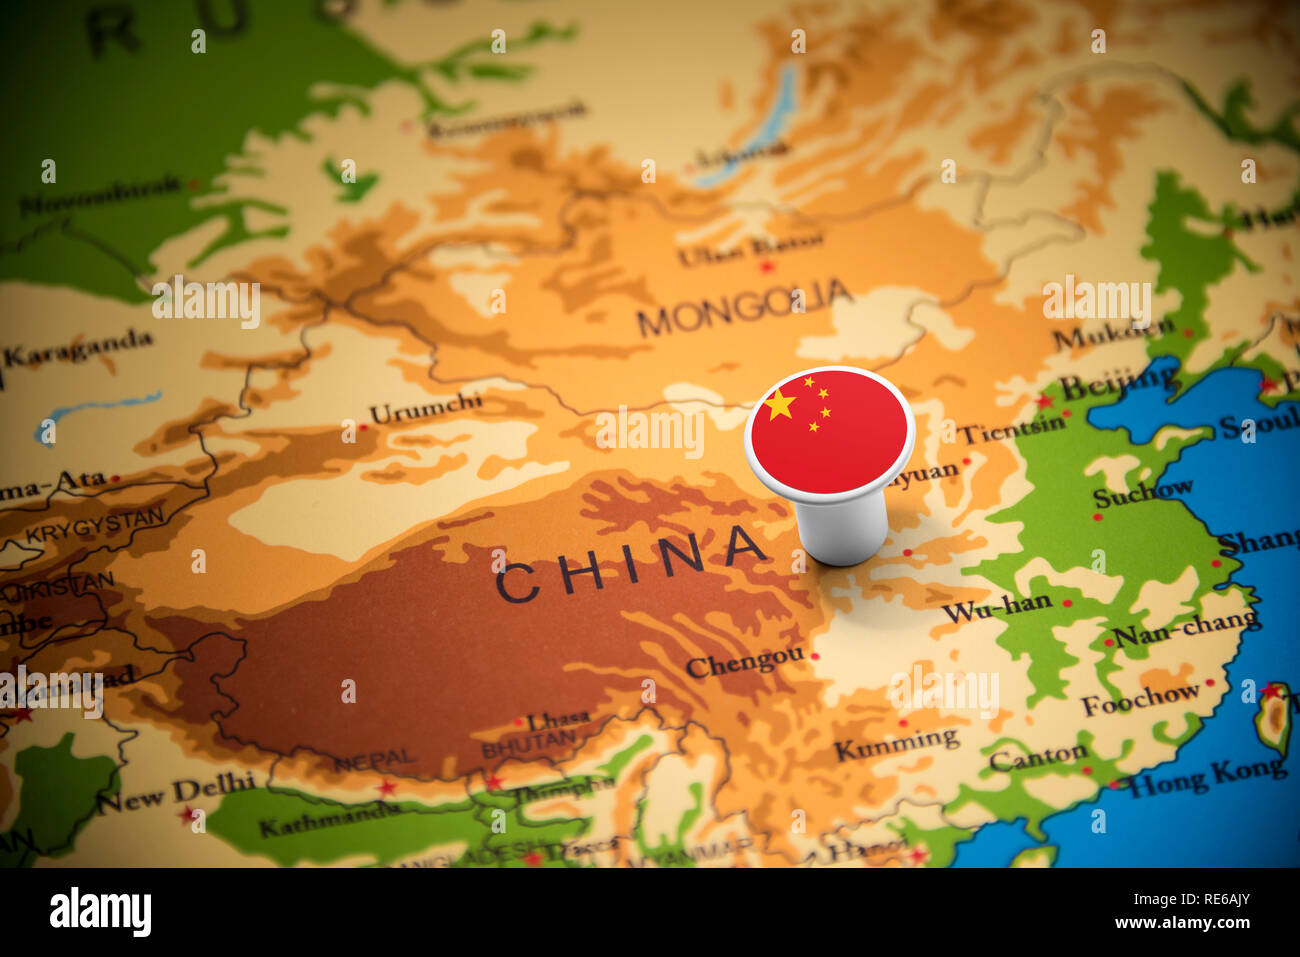 China marked with a flag on the map Stock Photo